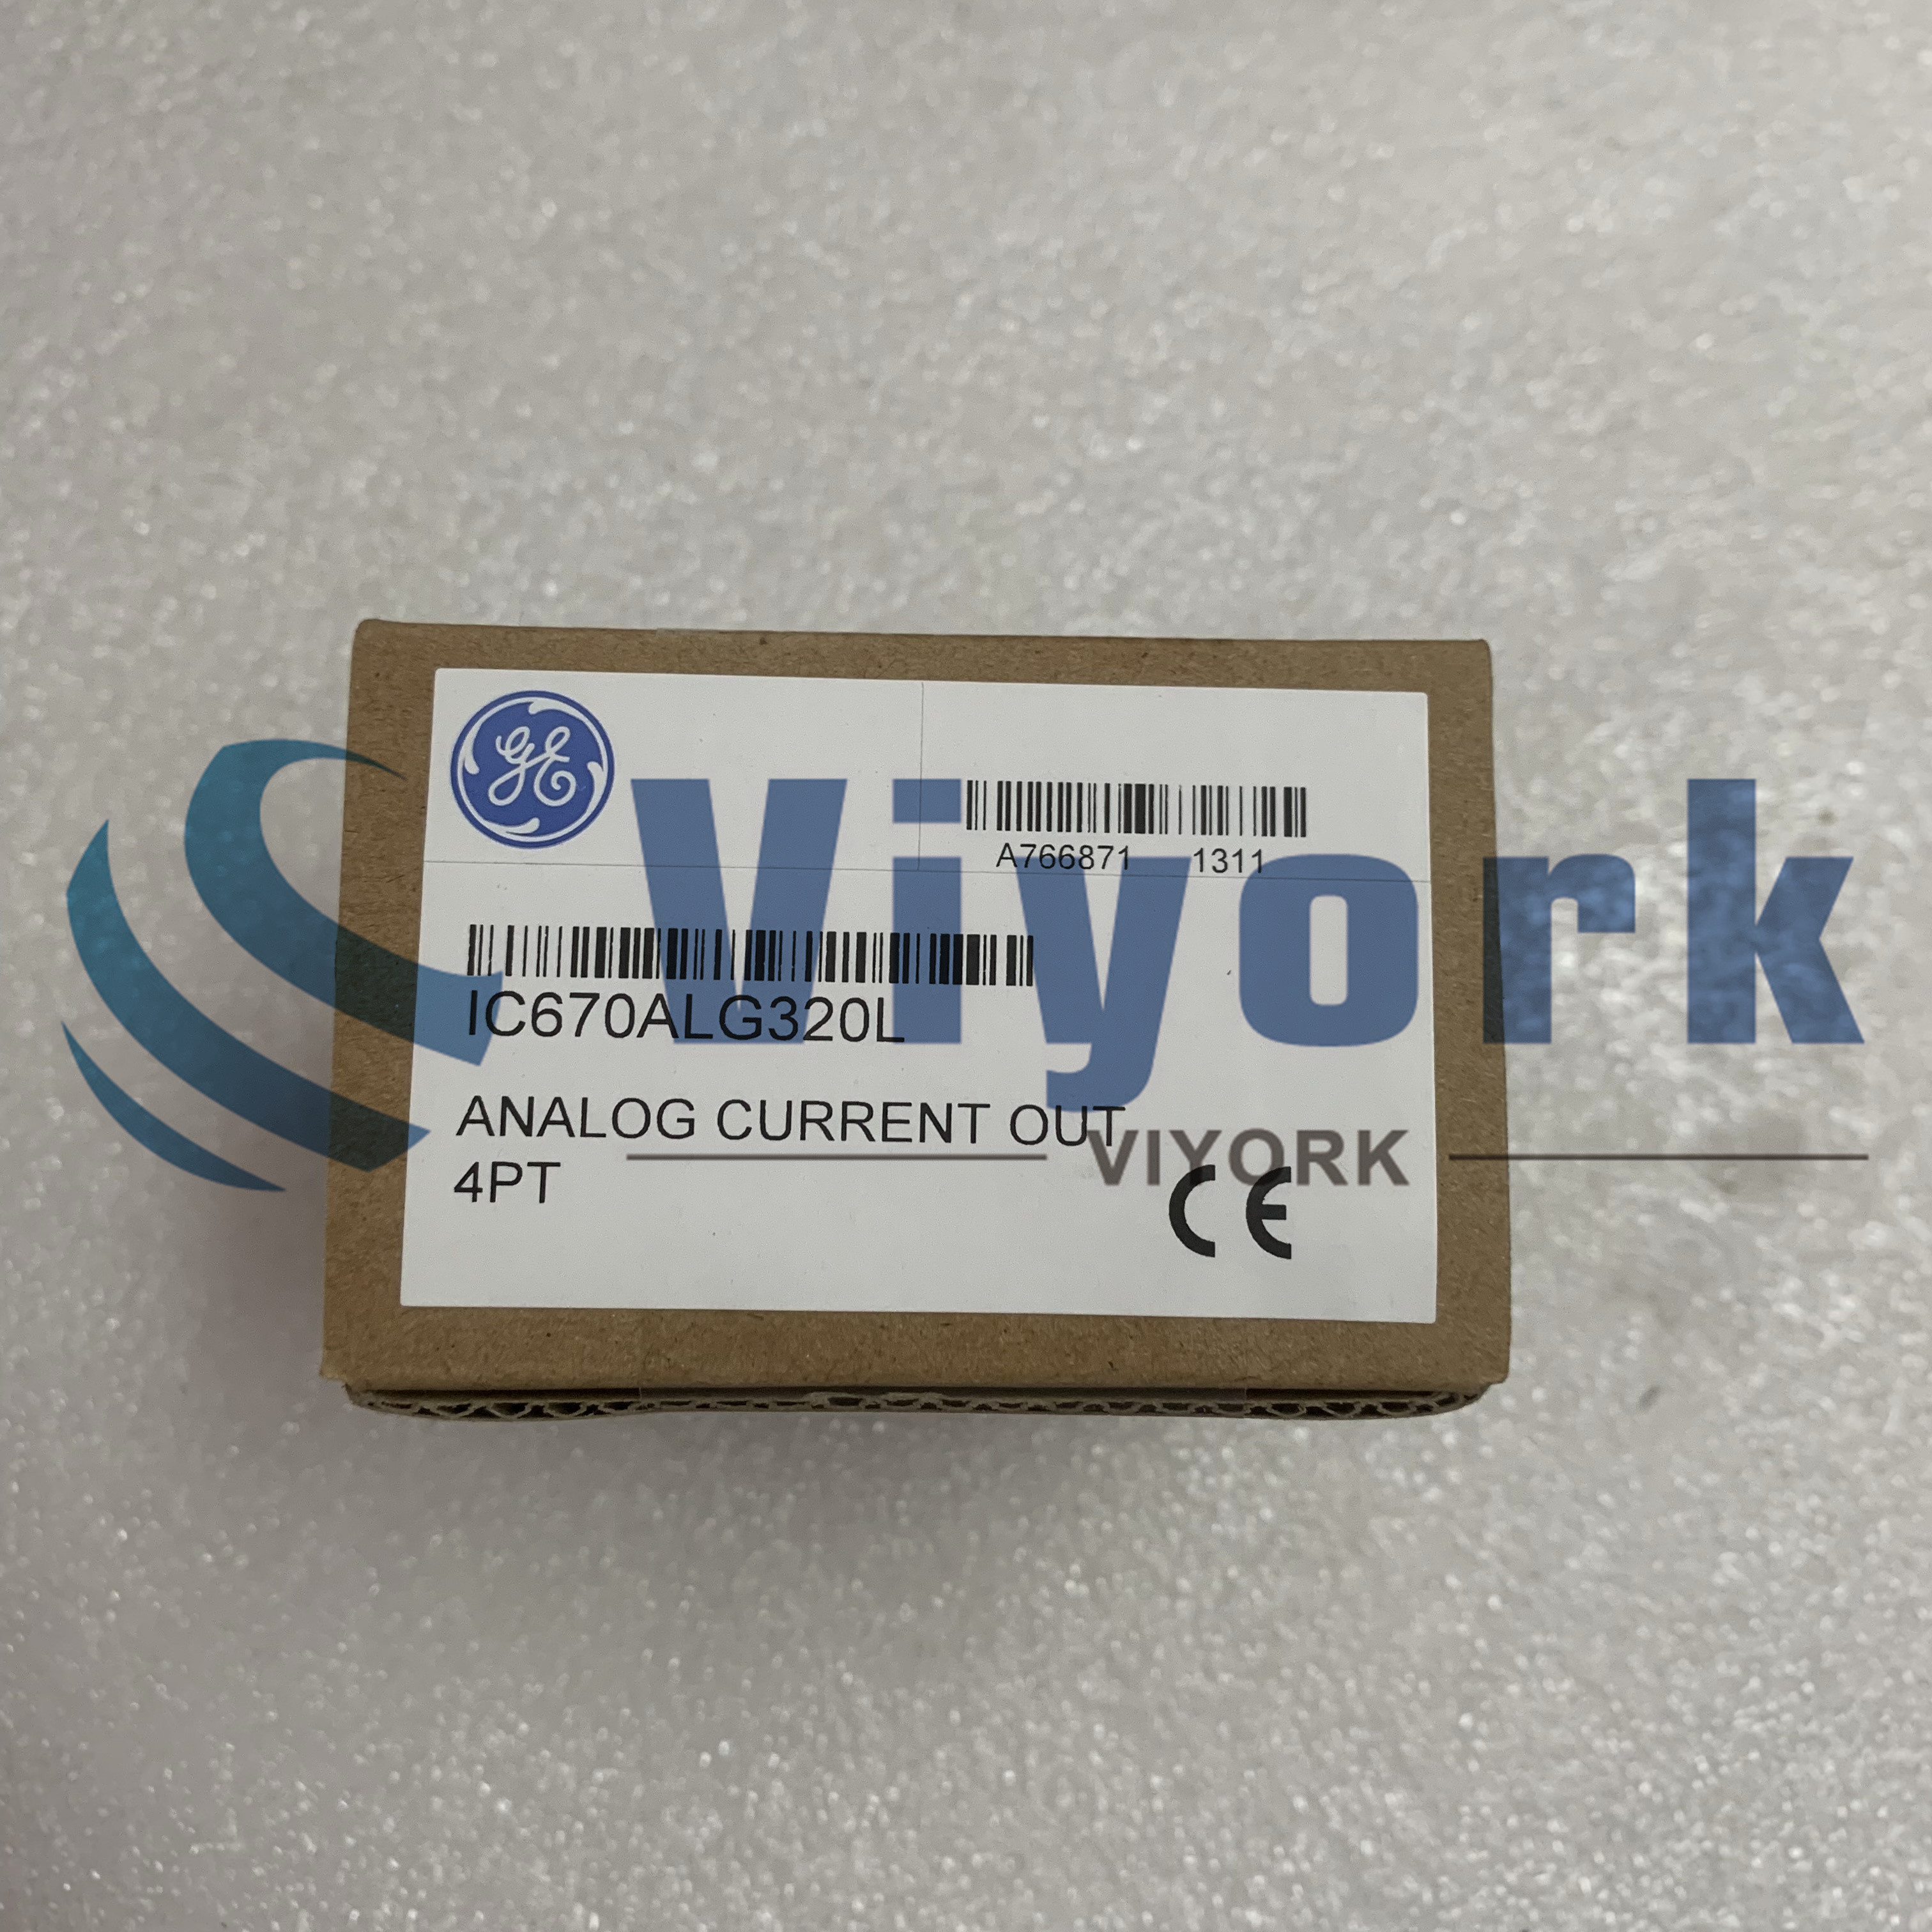 GE IC670ALG320 ANALOG OUTPUT MODULE CURRENT / VOLTAGE-SOURCE 4POINT NEW